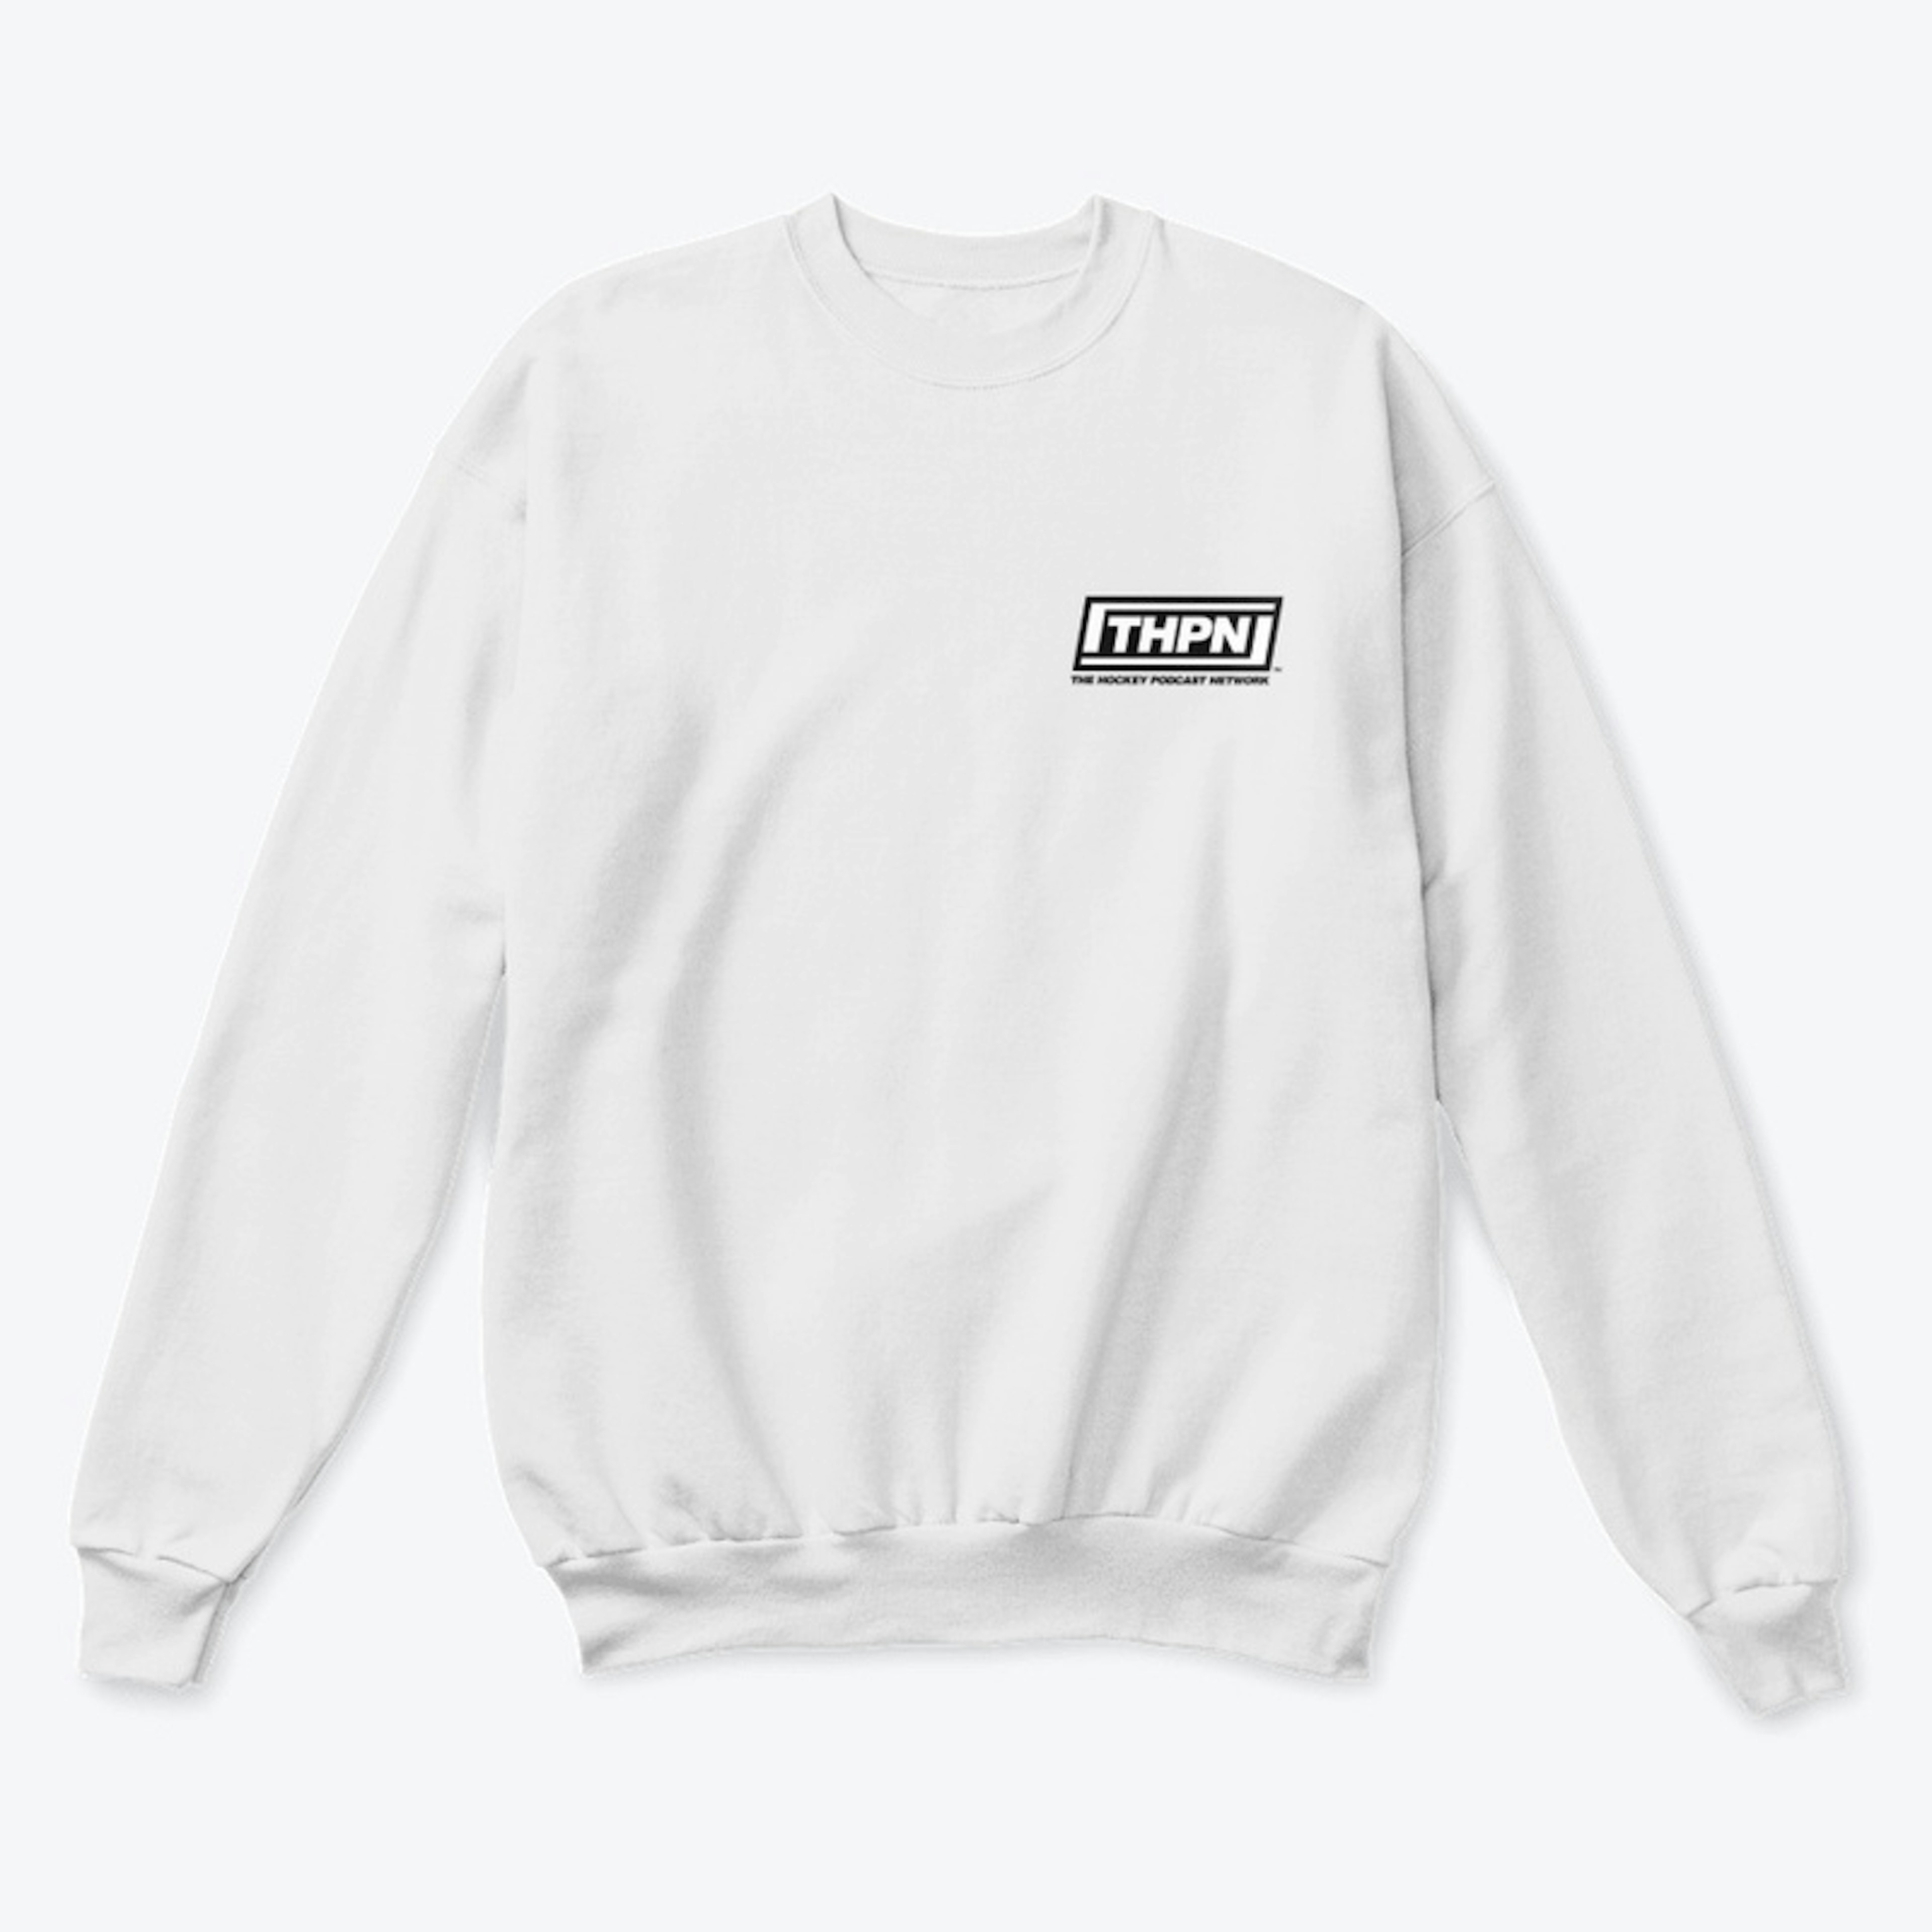 THPN Sweater (White)